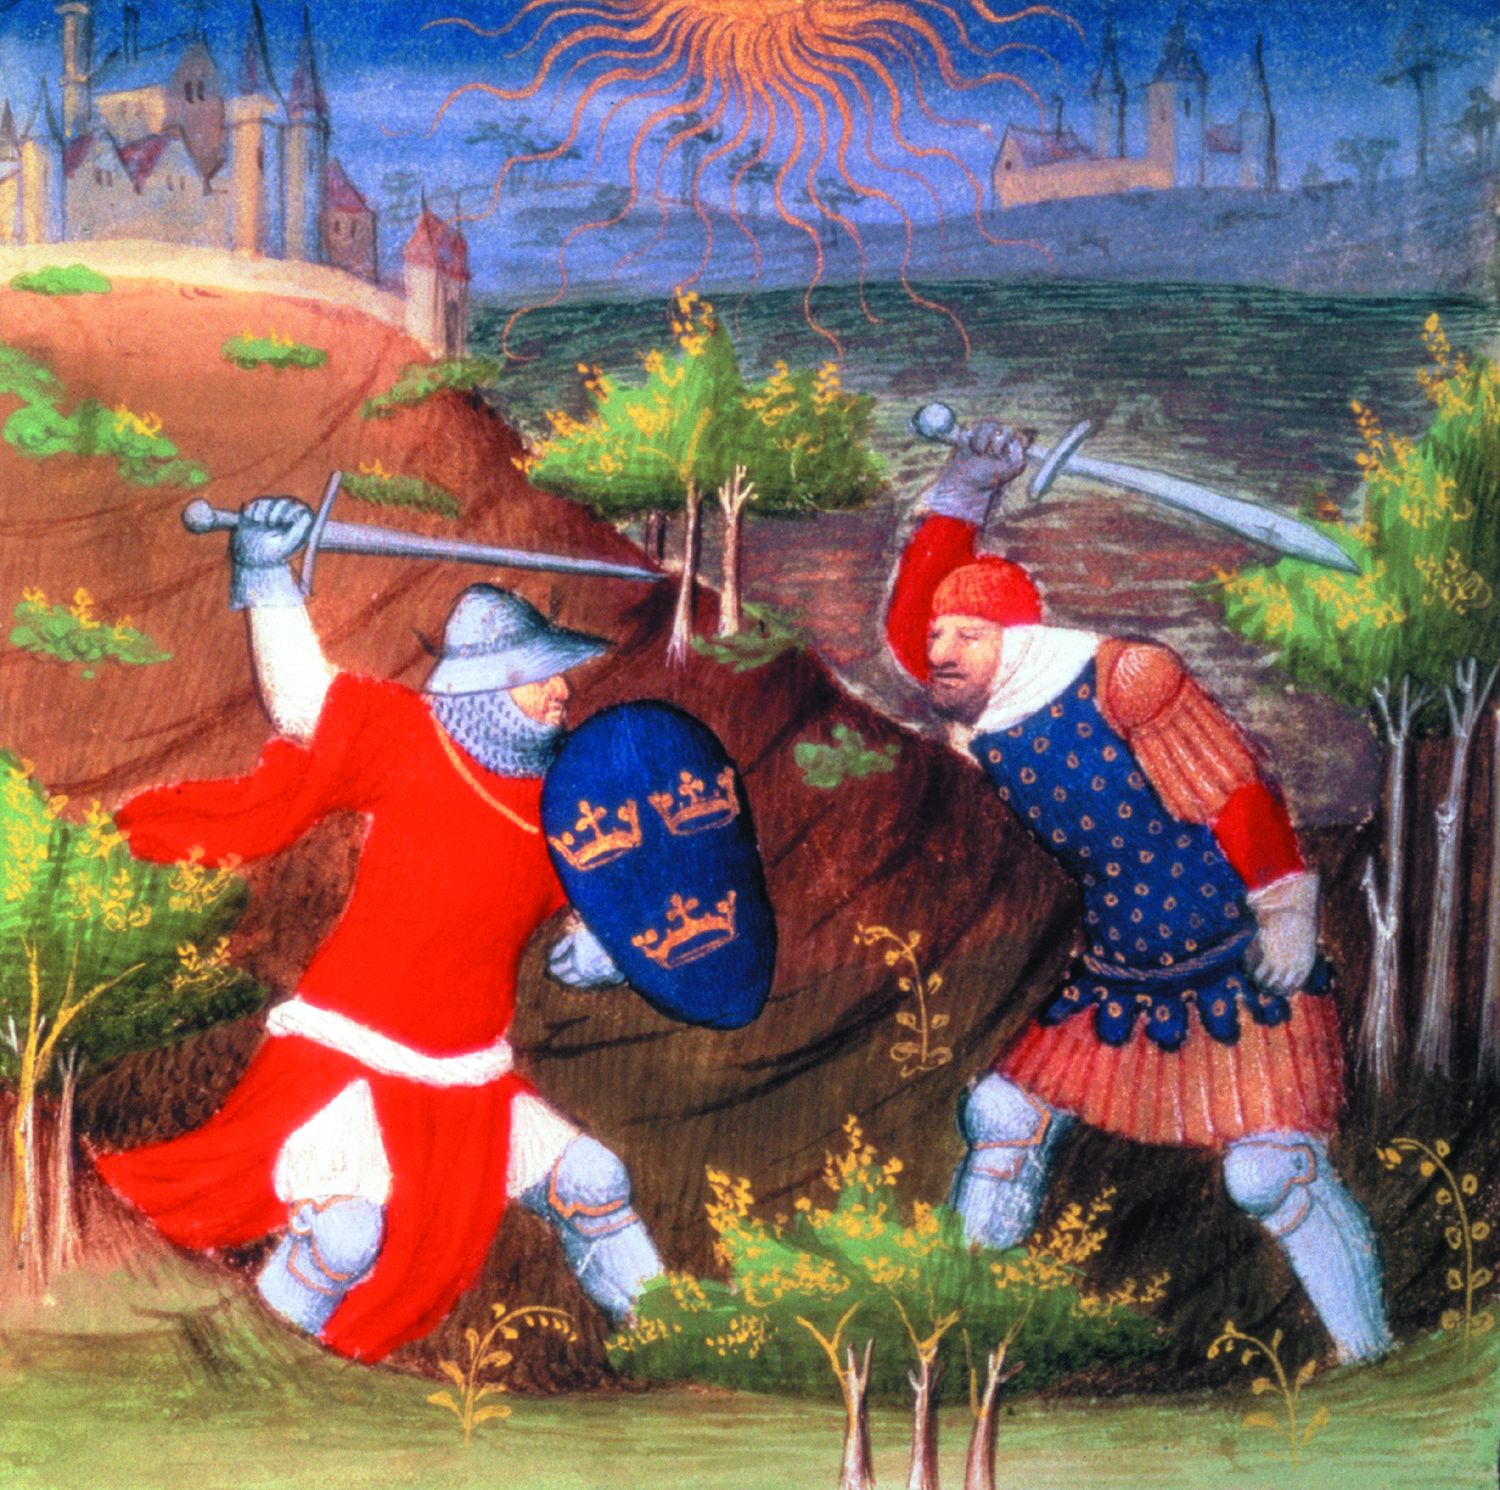 Arthur fighting again, this time with a Roman general, in a 15th-century manuscript by the master Boucicault.